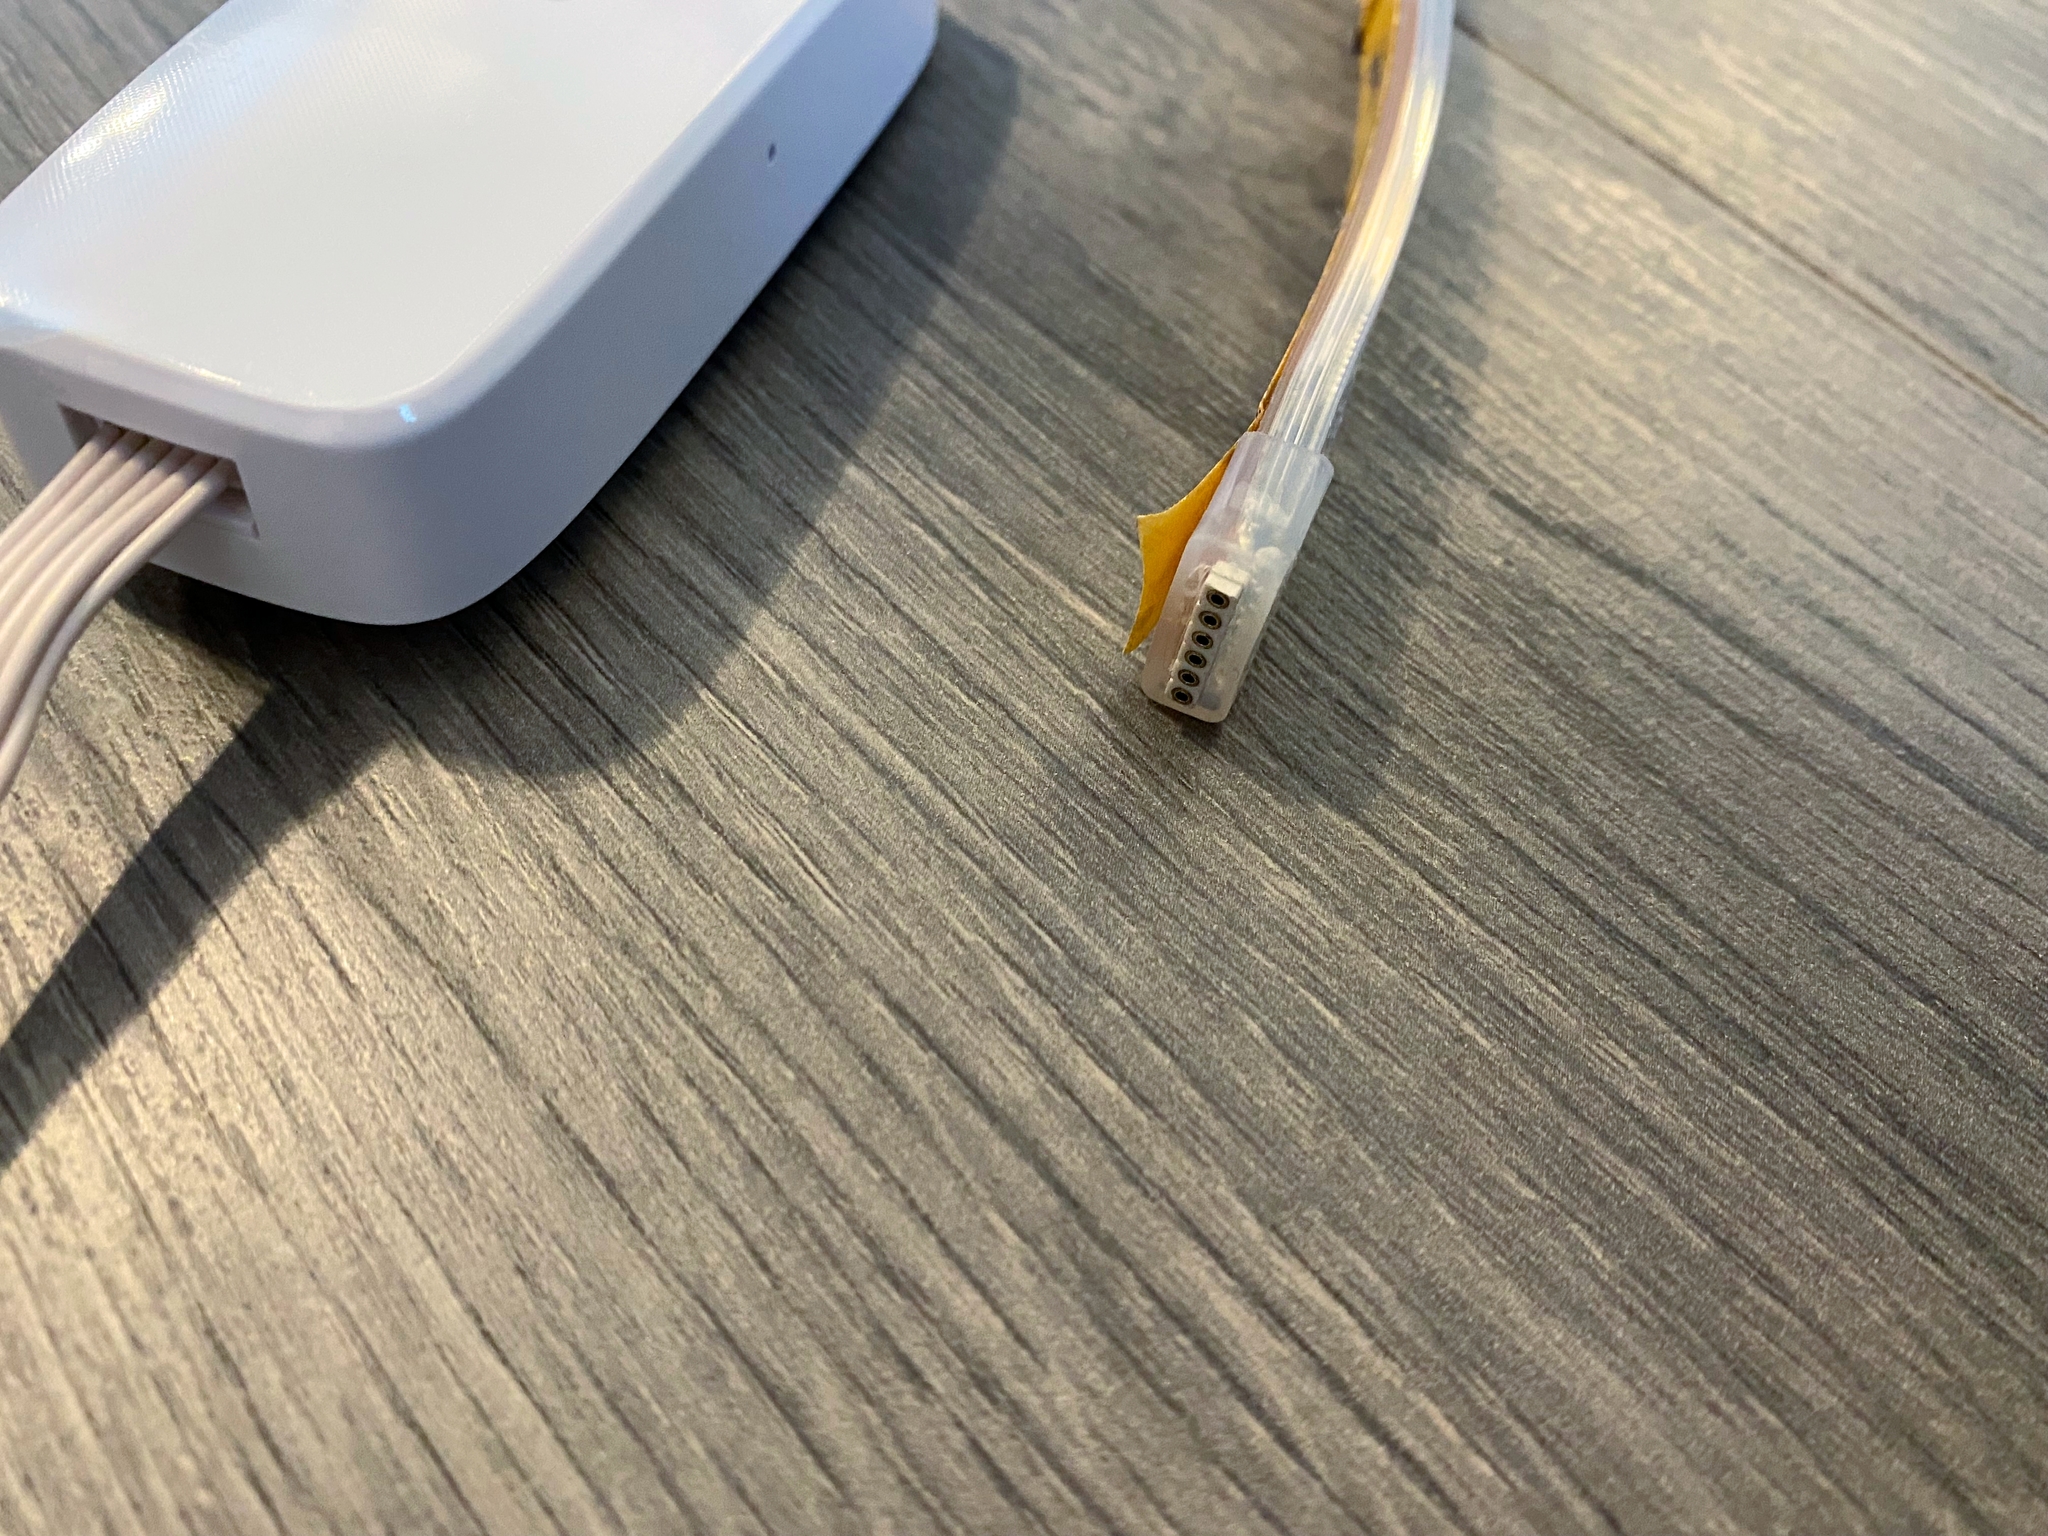 Eve Light Strip Review Connector